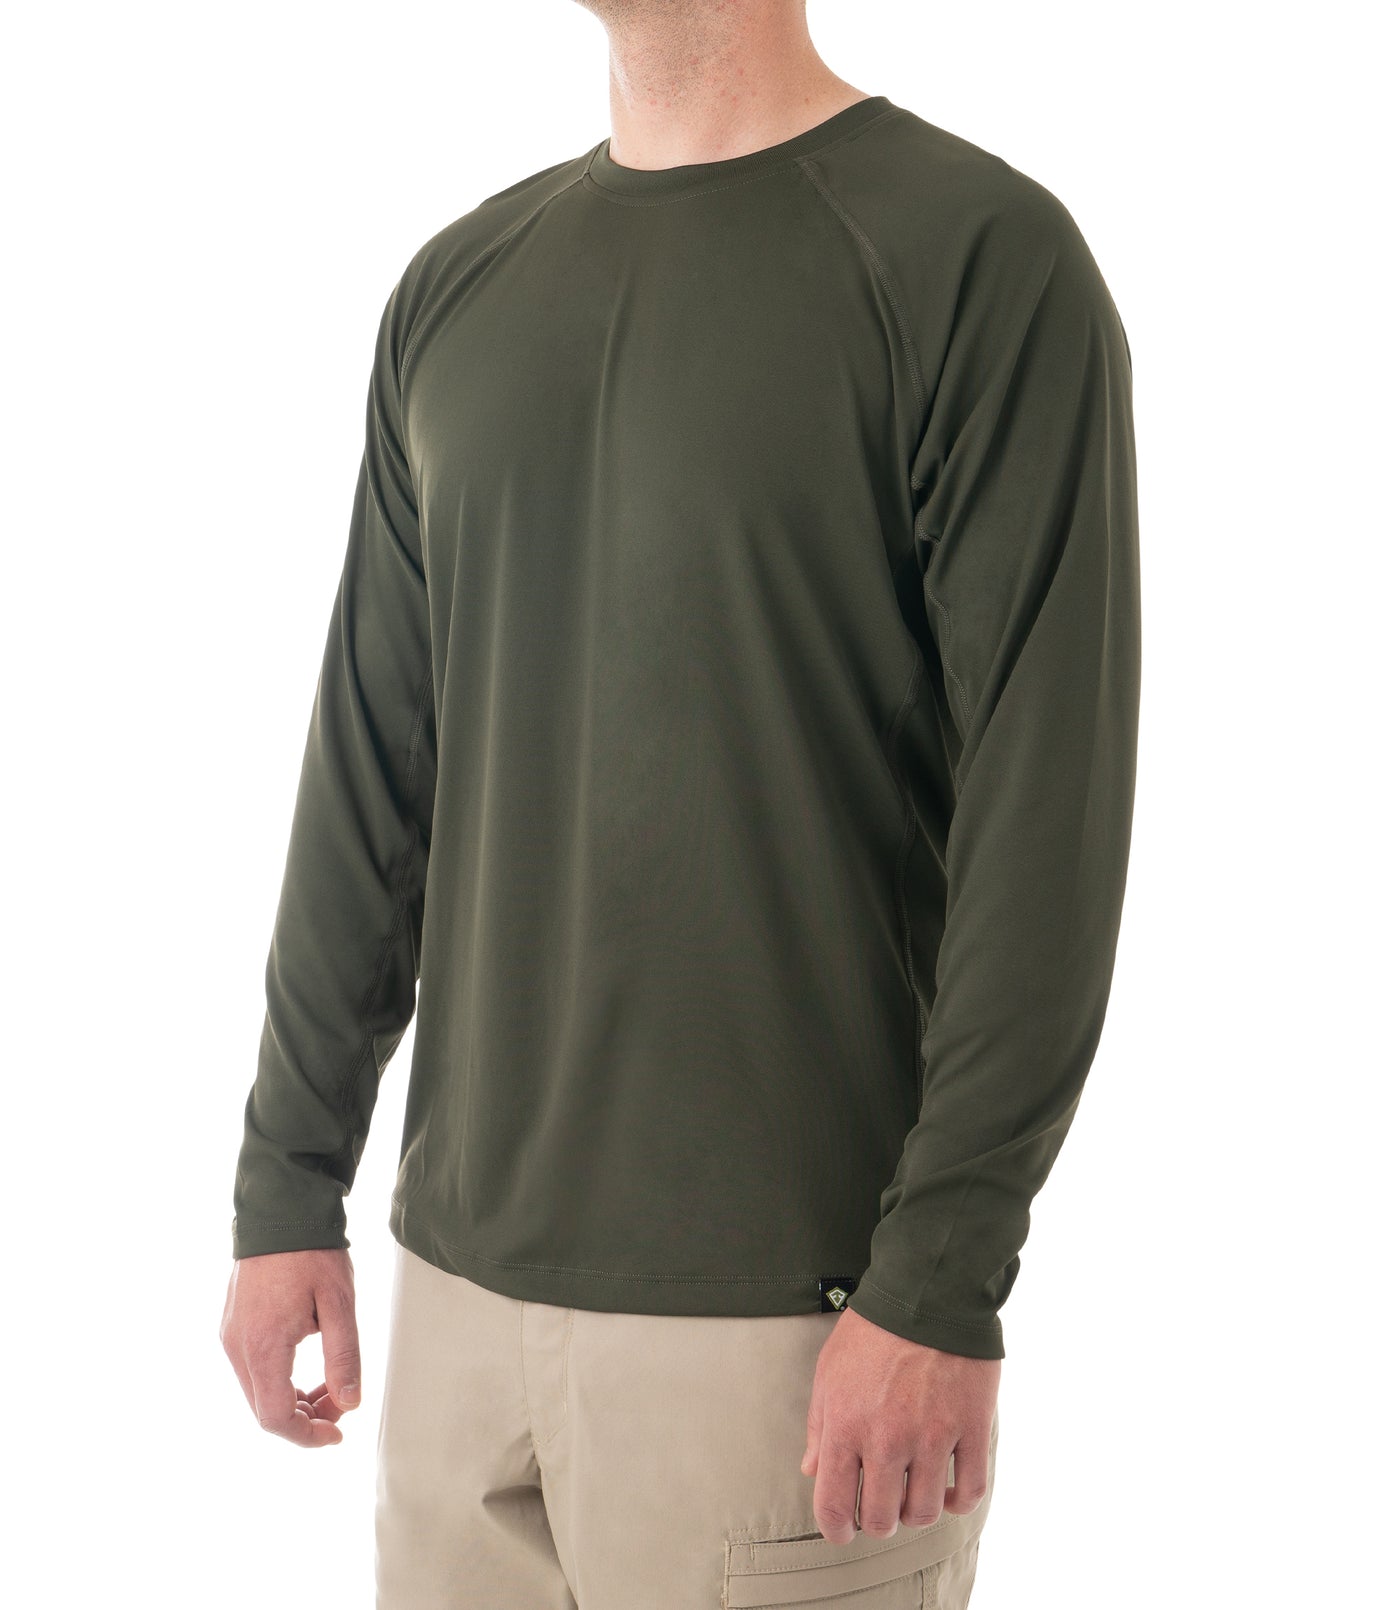 Side of Men's Performance Long Sleeve Shirt in OD Green